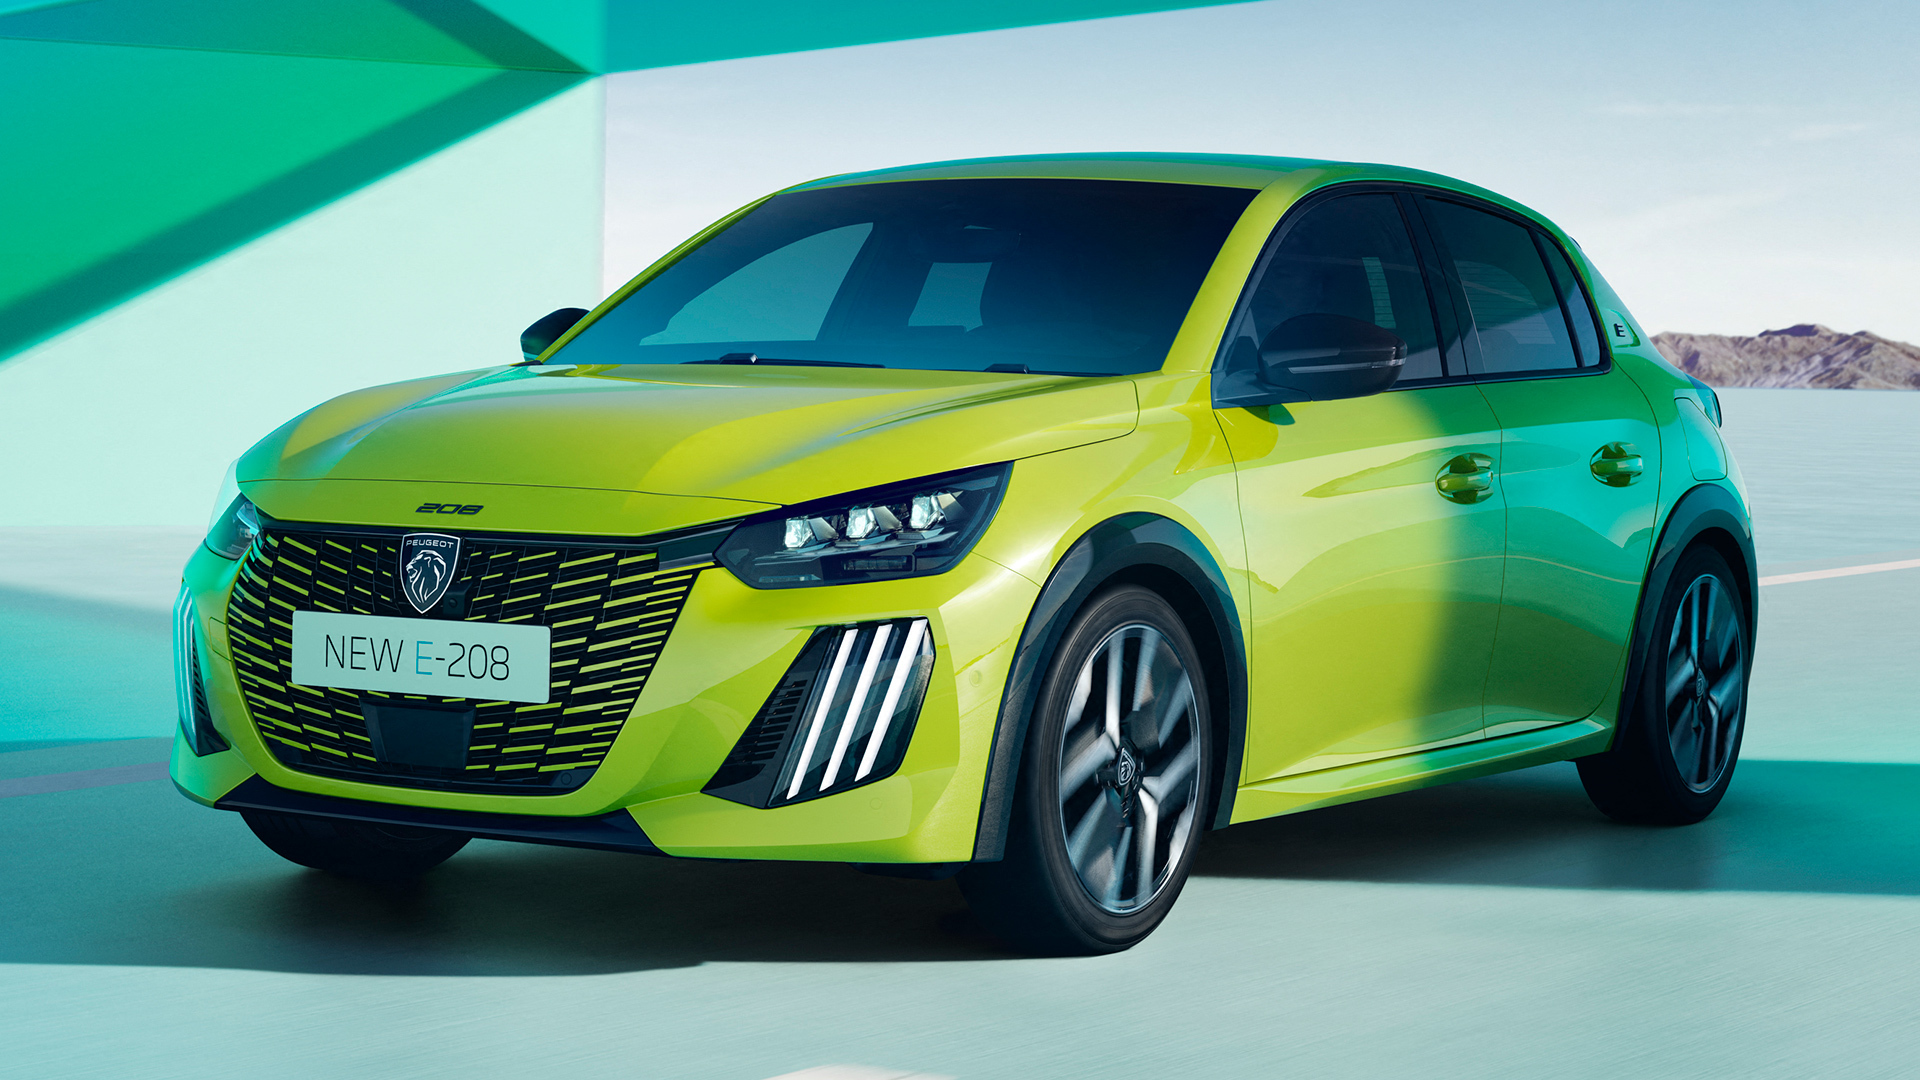 Peugeot Sticks to 208 as Foundation, Opts Against Developing a Smaller Electric Car